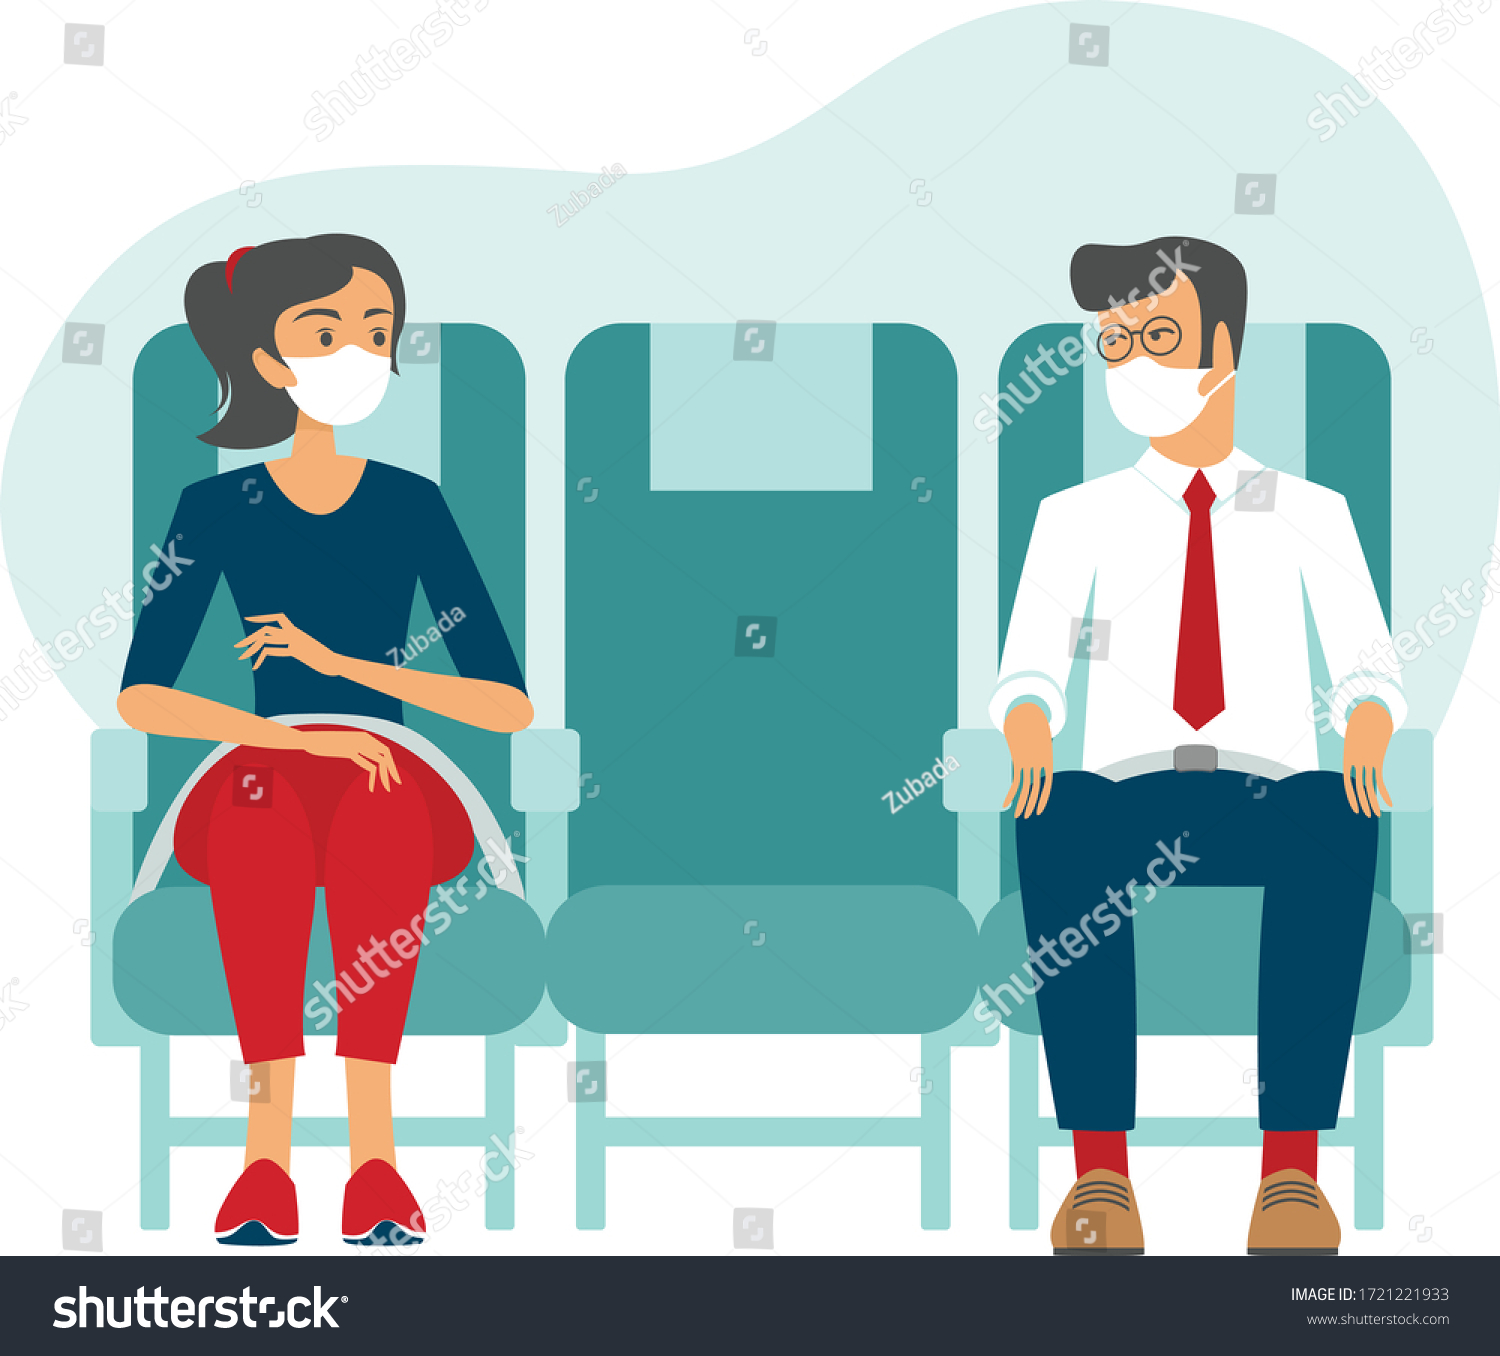 Passengers wearing protective medical masks travel by airplane. New seating regulations on flights. Travel during coronavirus COVID-19 disease outbreak. vector illustration #1721221933